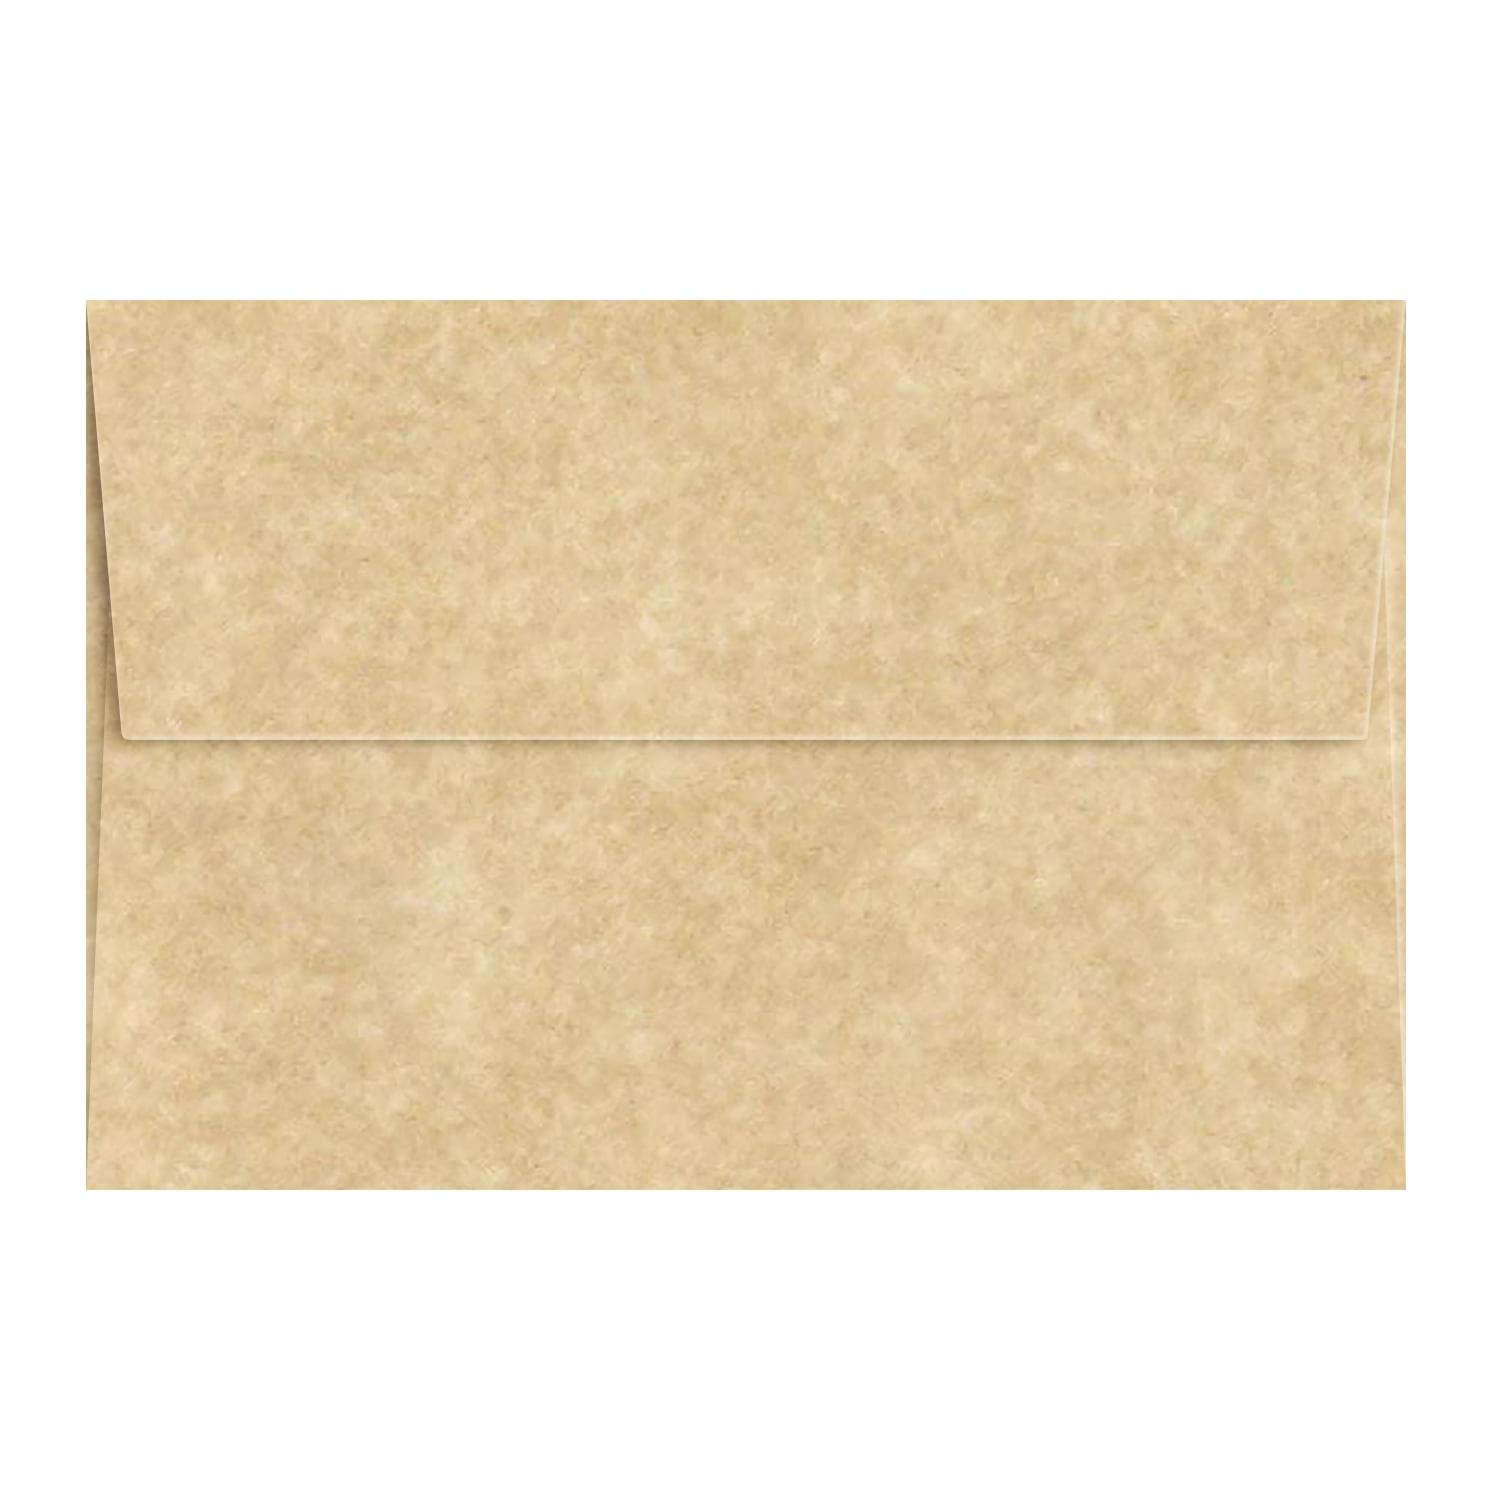 Details about   ValBox 100 Pack A7 Invitation Envelopes 5 x 7 White Kraft Paper Self 